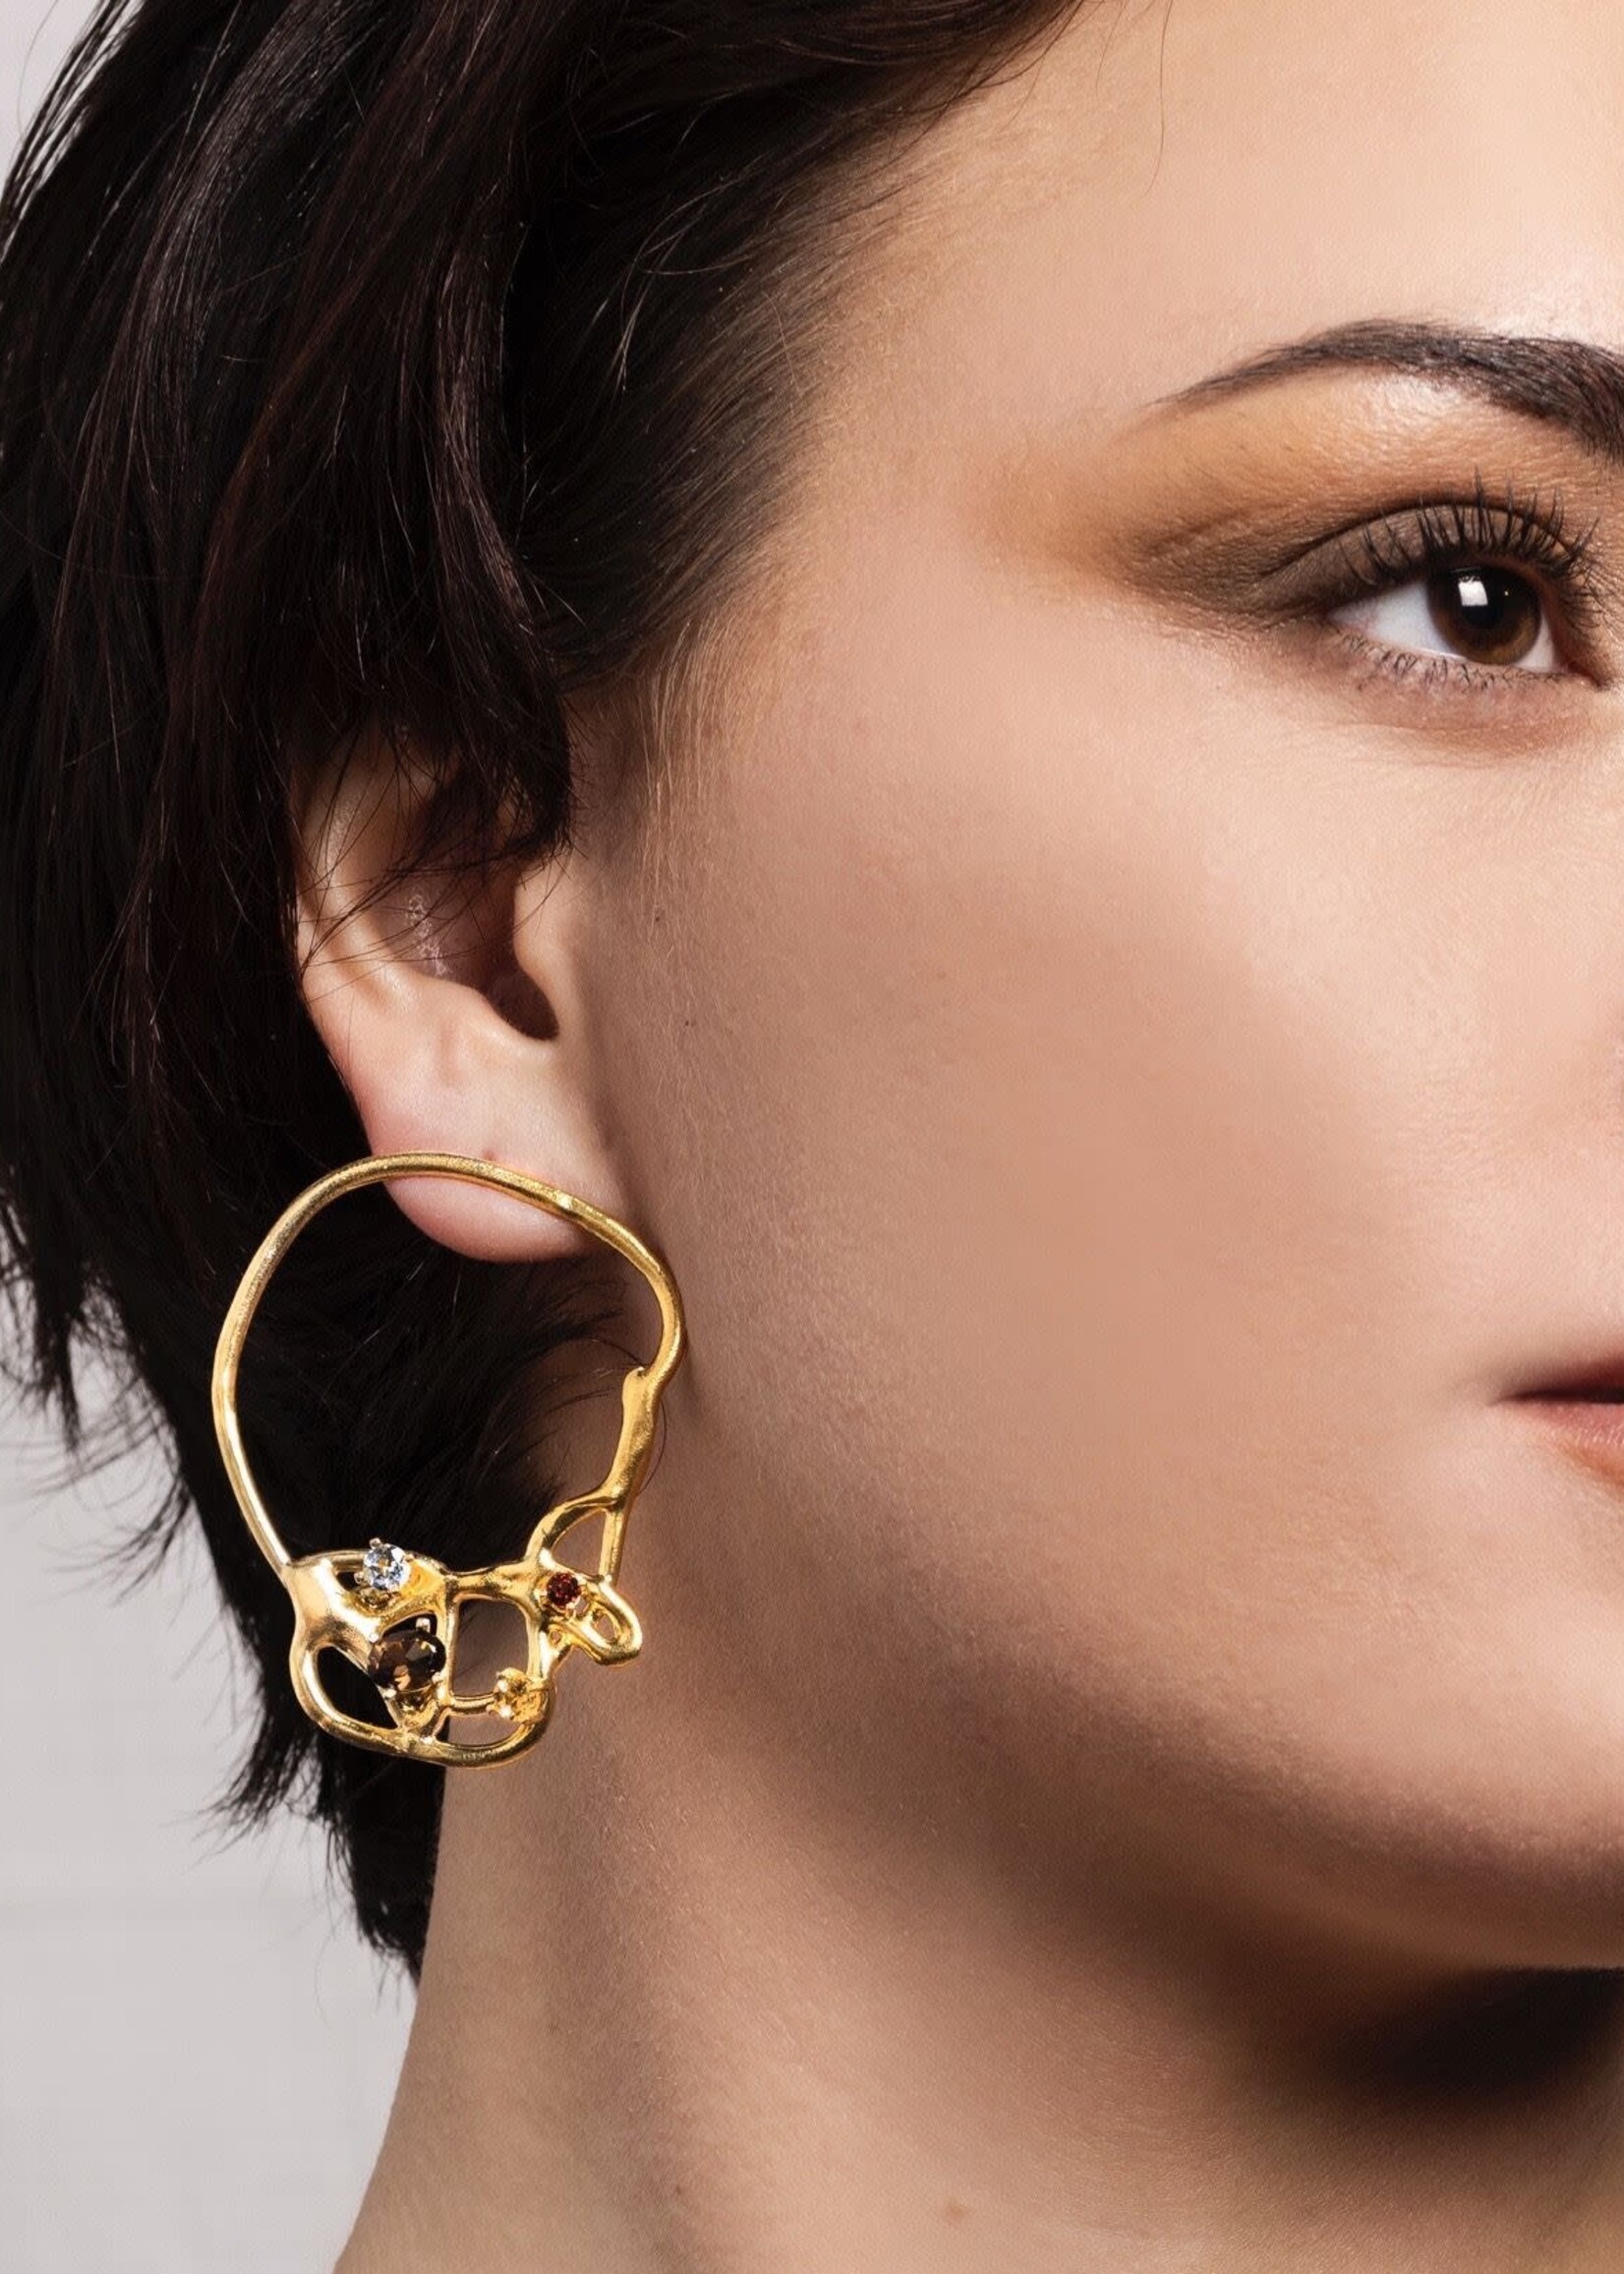 Sydnie Wainland Gold Confetti Abstract Earrings